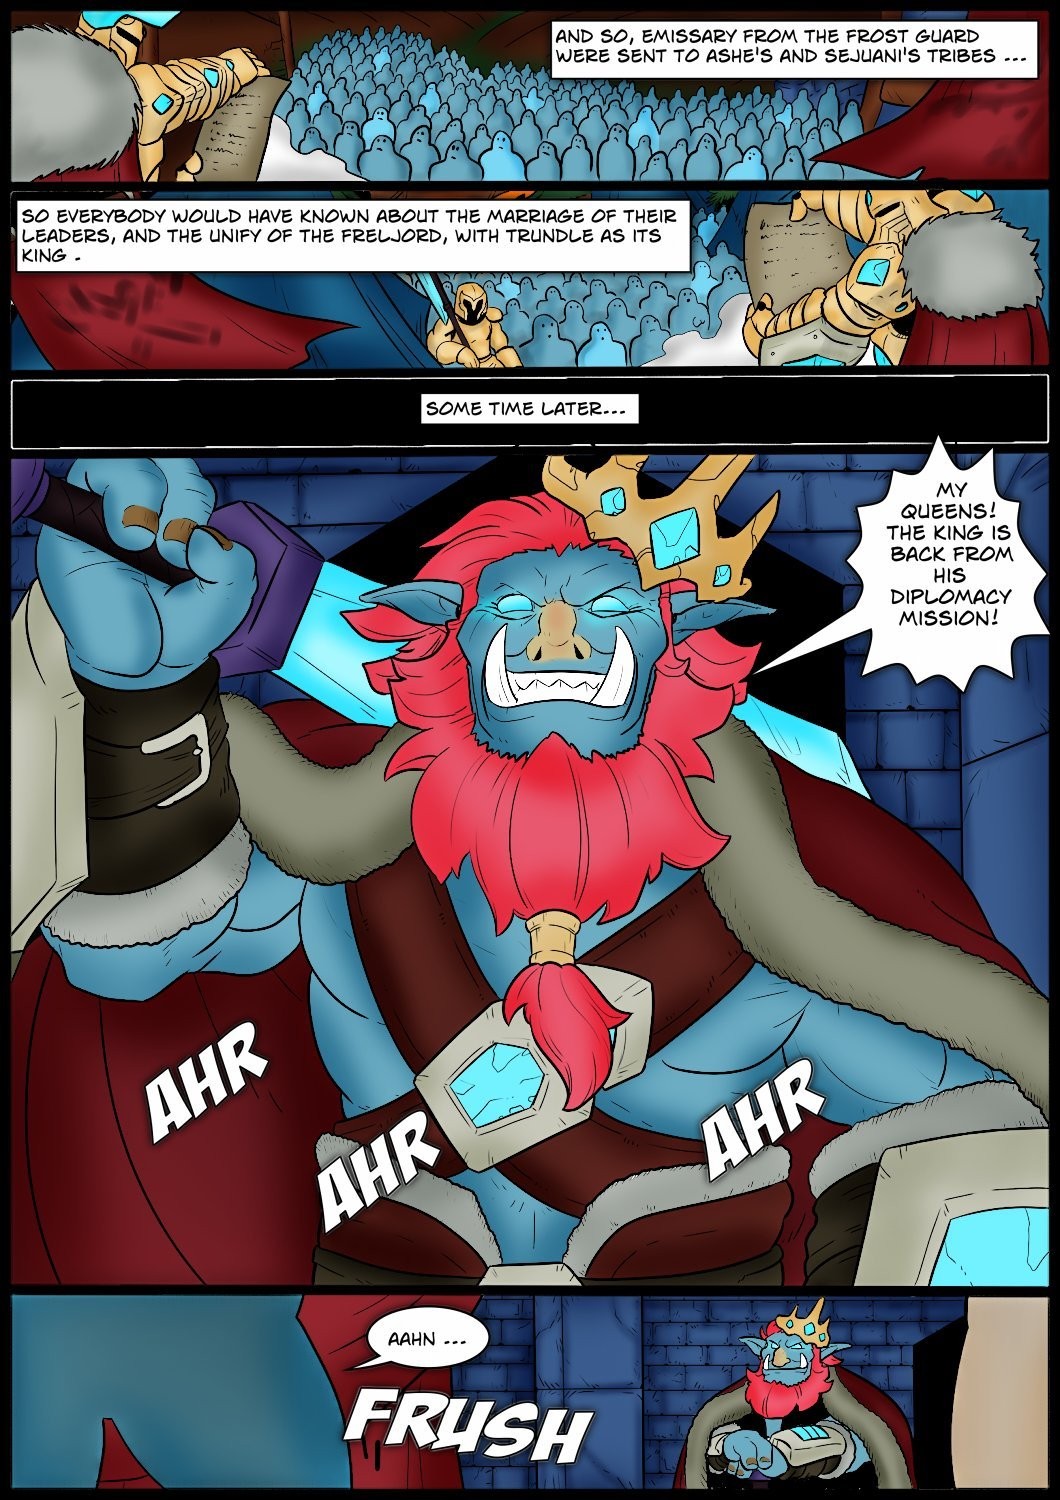 Tales of the Troll King ch. 1 - 3 ] [Colorized] porn comic picture 55